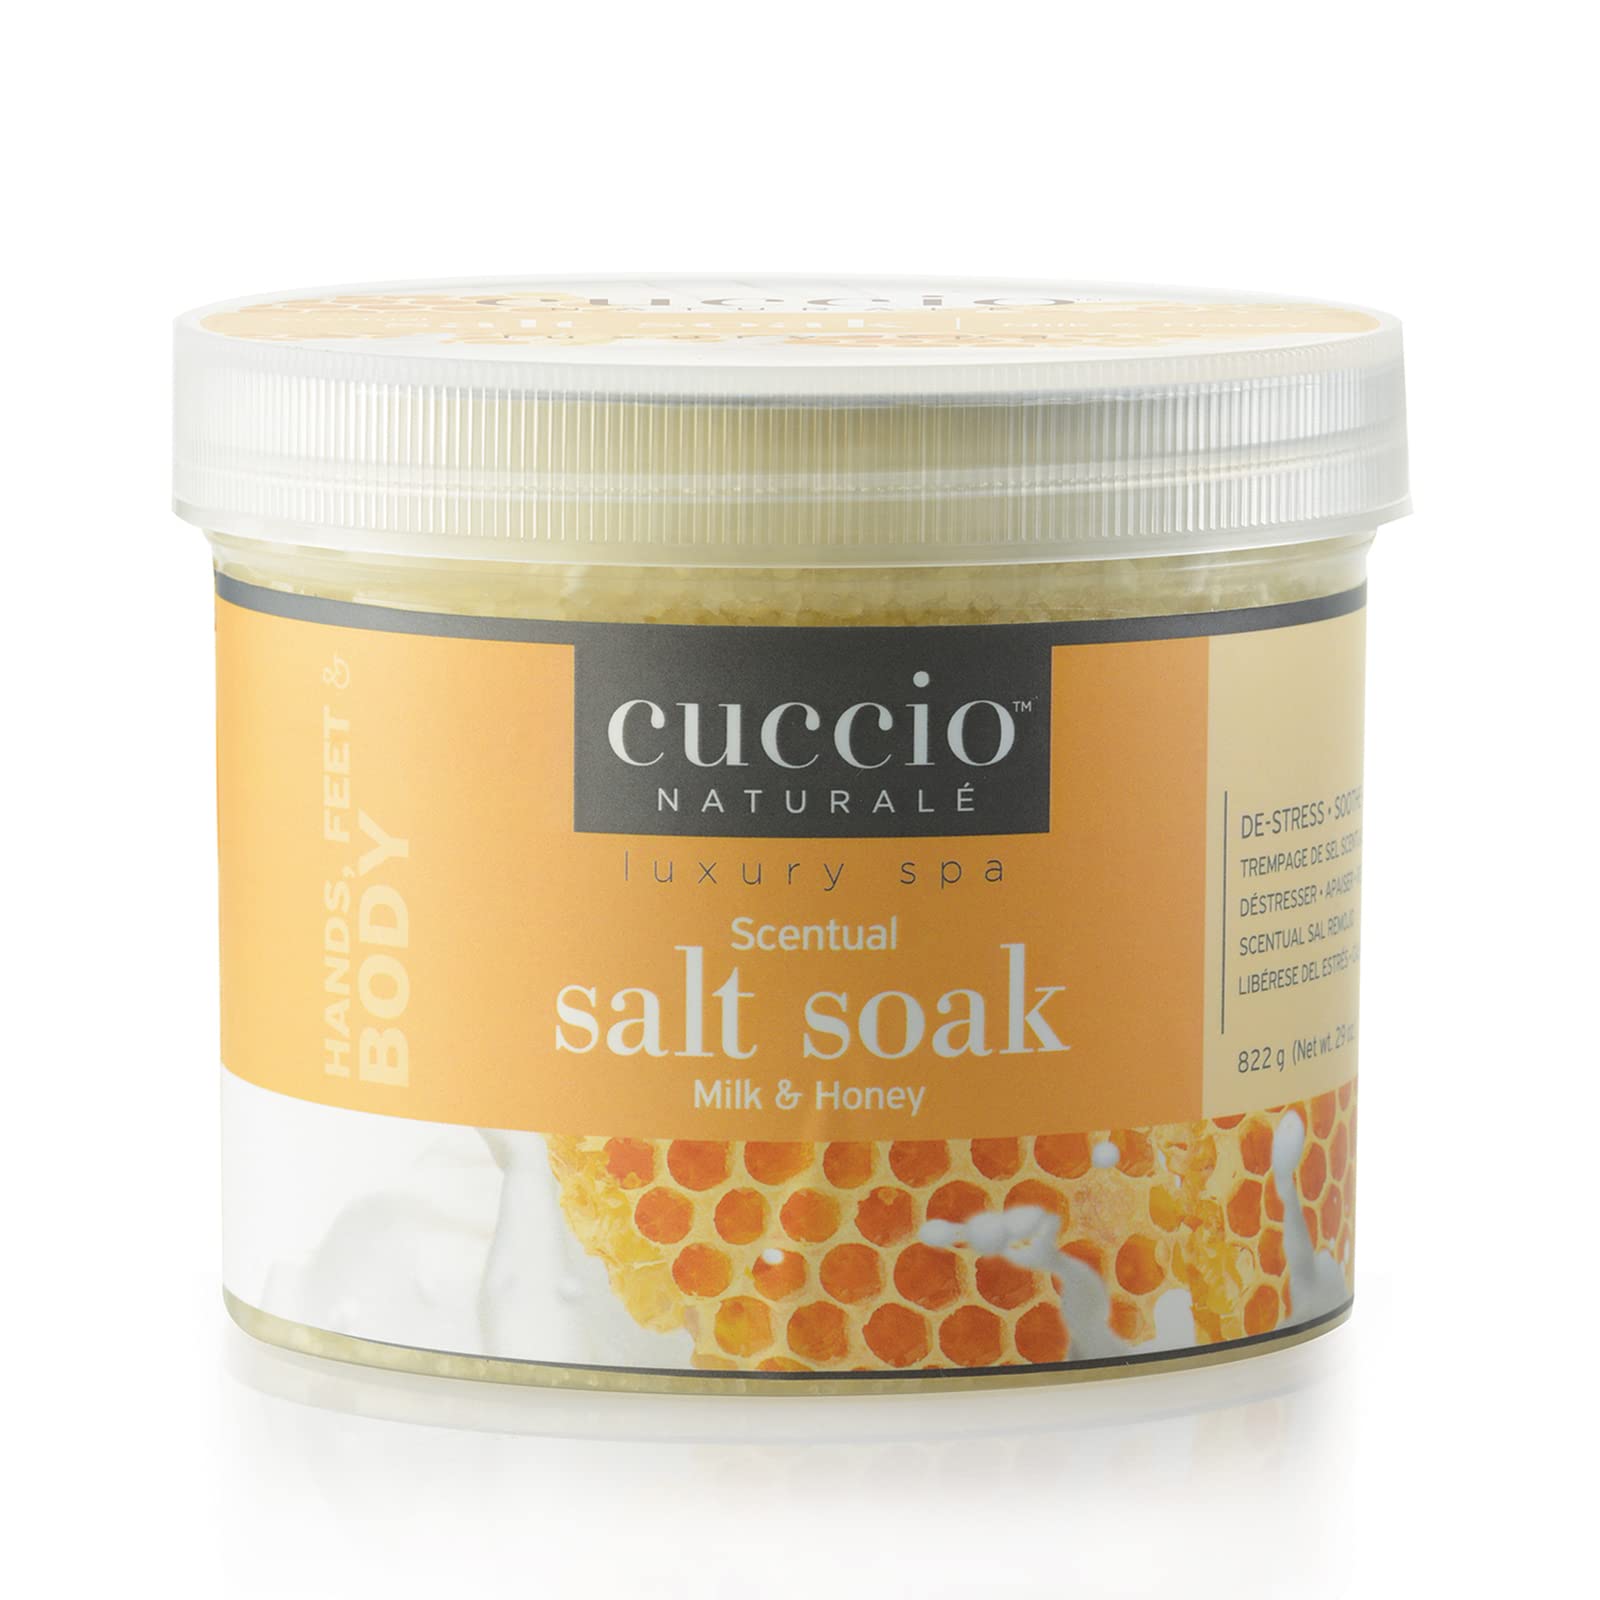 Cuccio Naturale Scentual Salt Soak - Invigorating Salts With An Irresistible Scent - Rejuvenate And Soothe Tired Feet - Softens And Leaves The Skin Fresh And Clean - Milk And Honey - 29 Oz